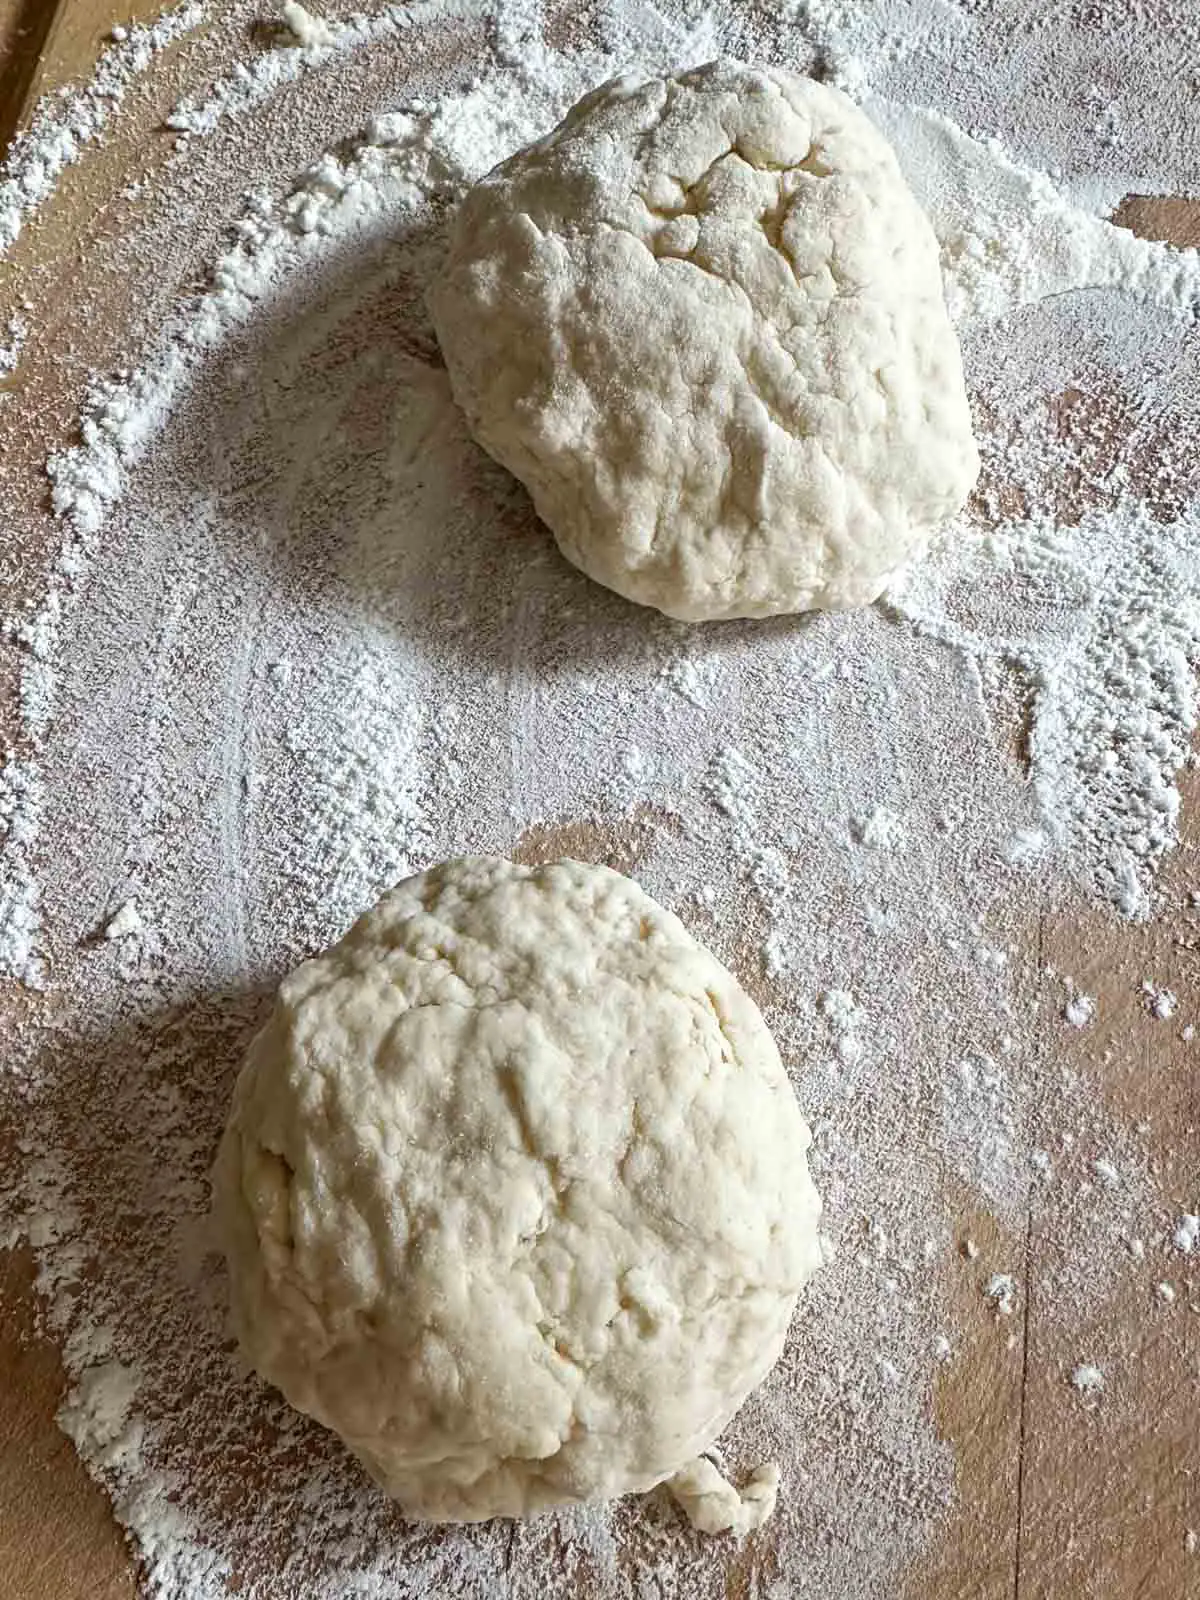 A floured cutting board with two dough balls.